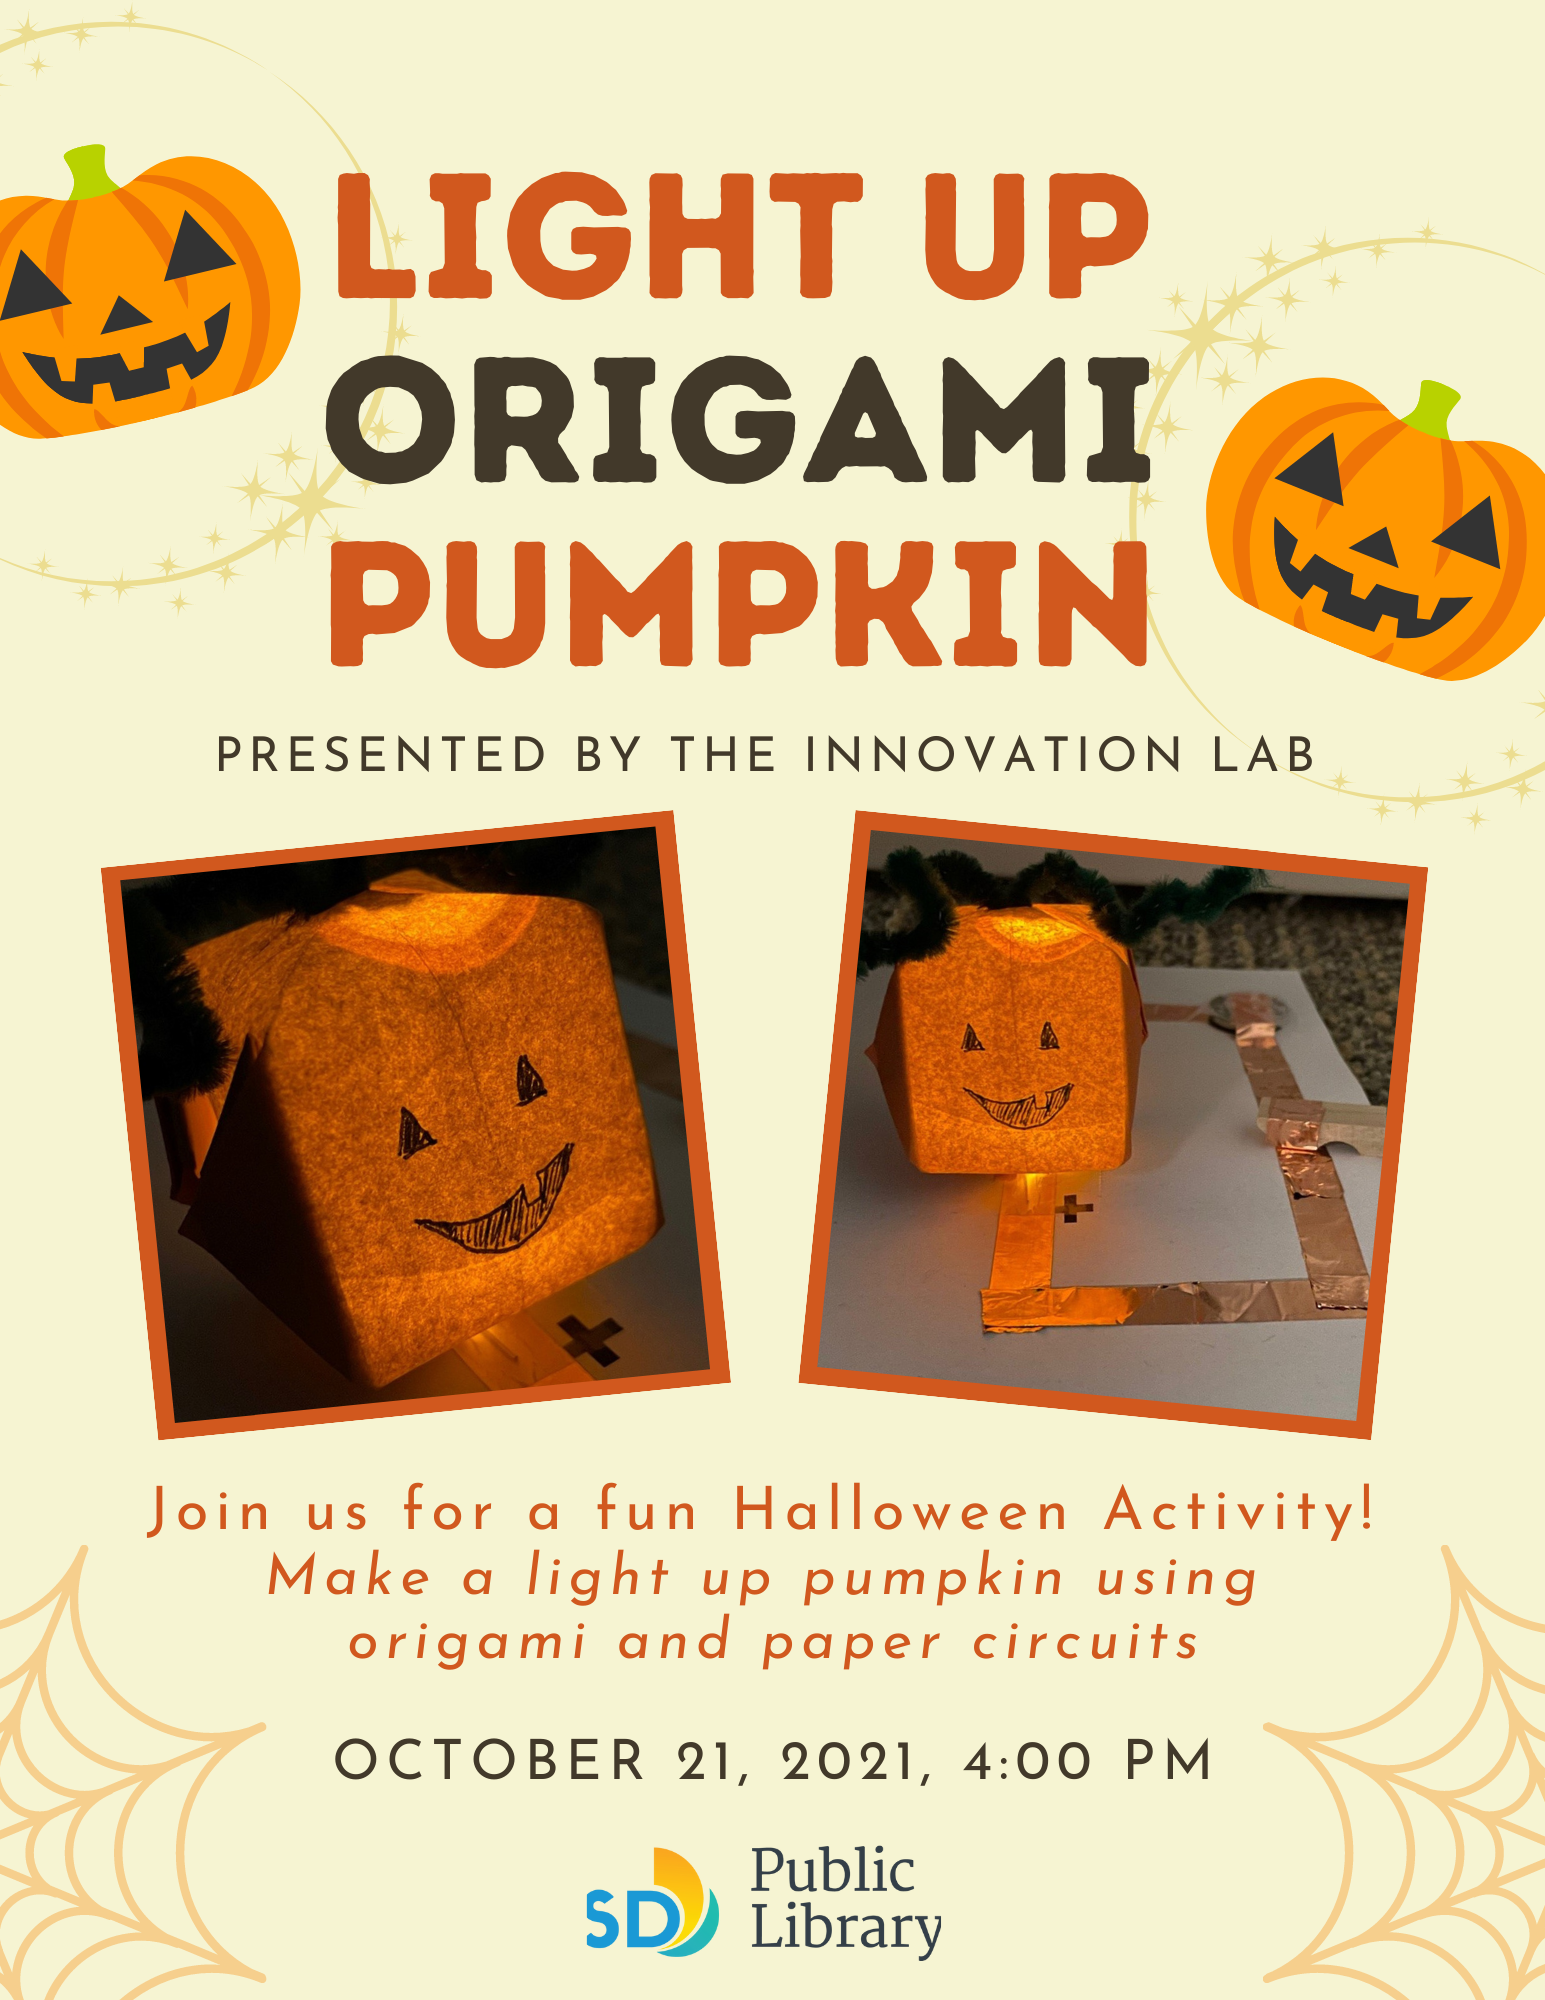 Light up origami pumpkin - Join us for a fun Halloween activity! Make a pumpkin using origami and paper circuits.